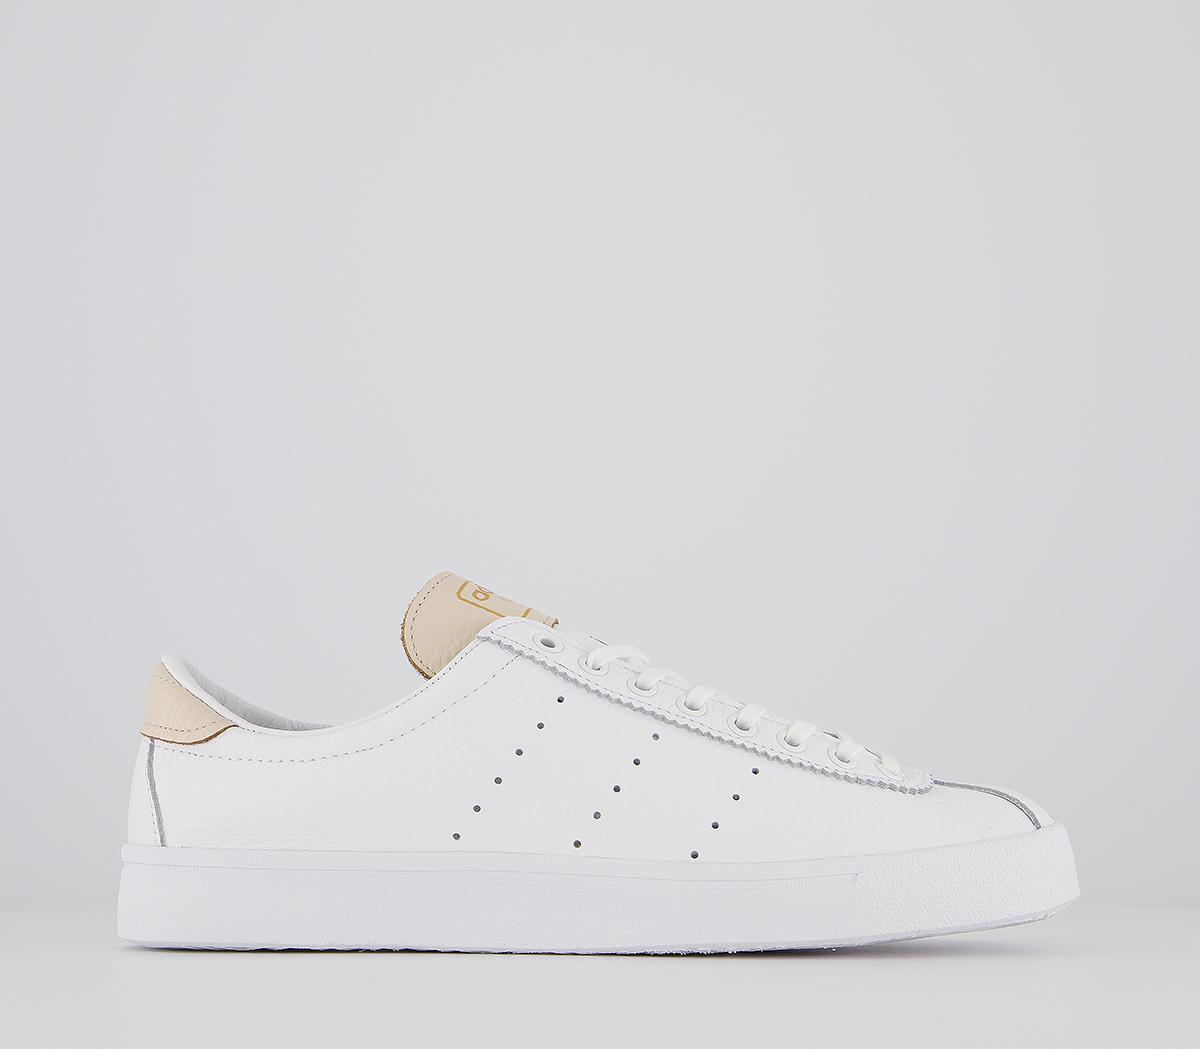 adidas Lacombe Trainers Cream White Vapour Pink - Men's Trainers